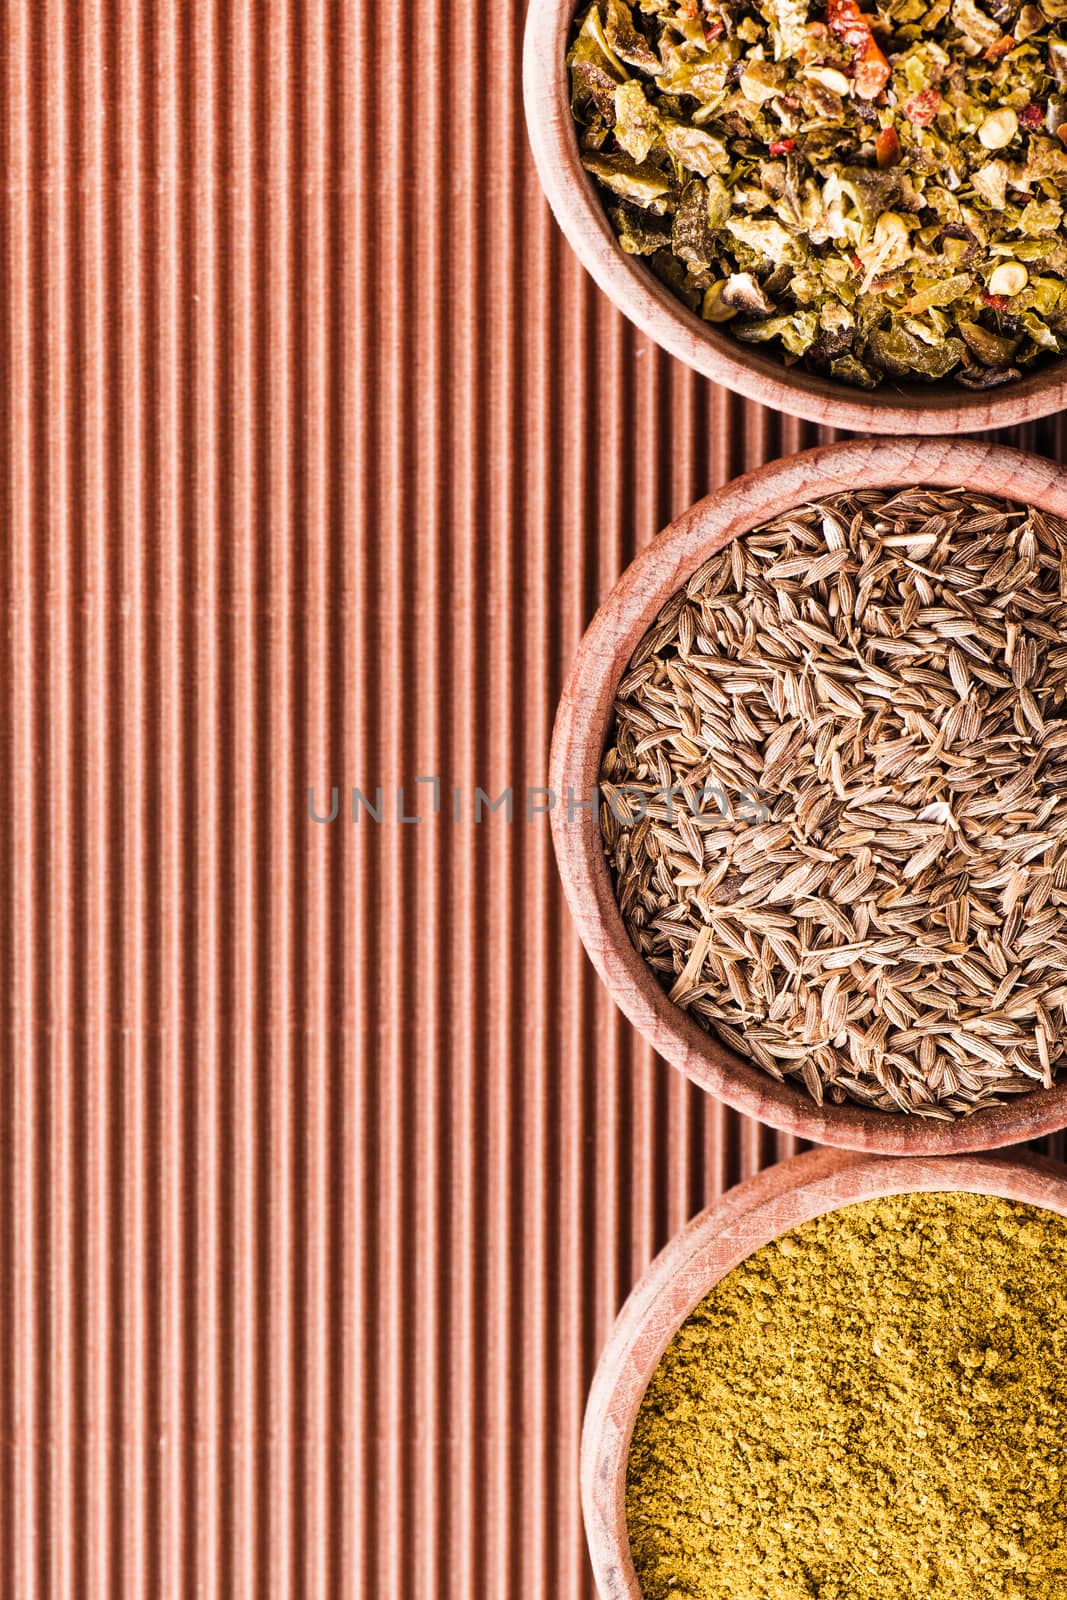 set cumin,hops-suneli,paprika in a wooden bowl close-up on a brown background